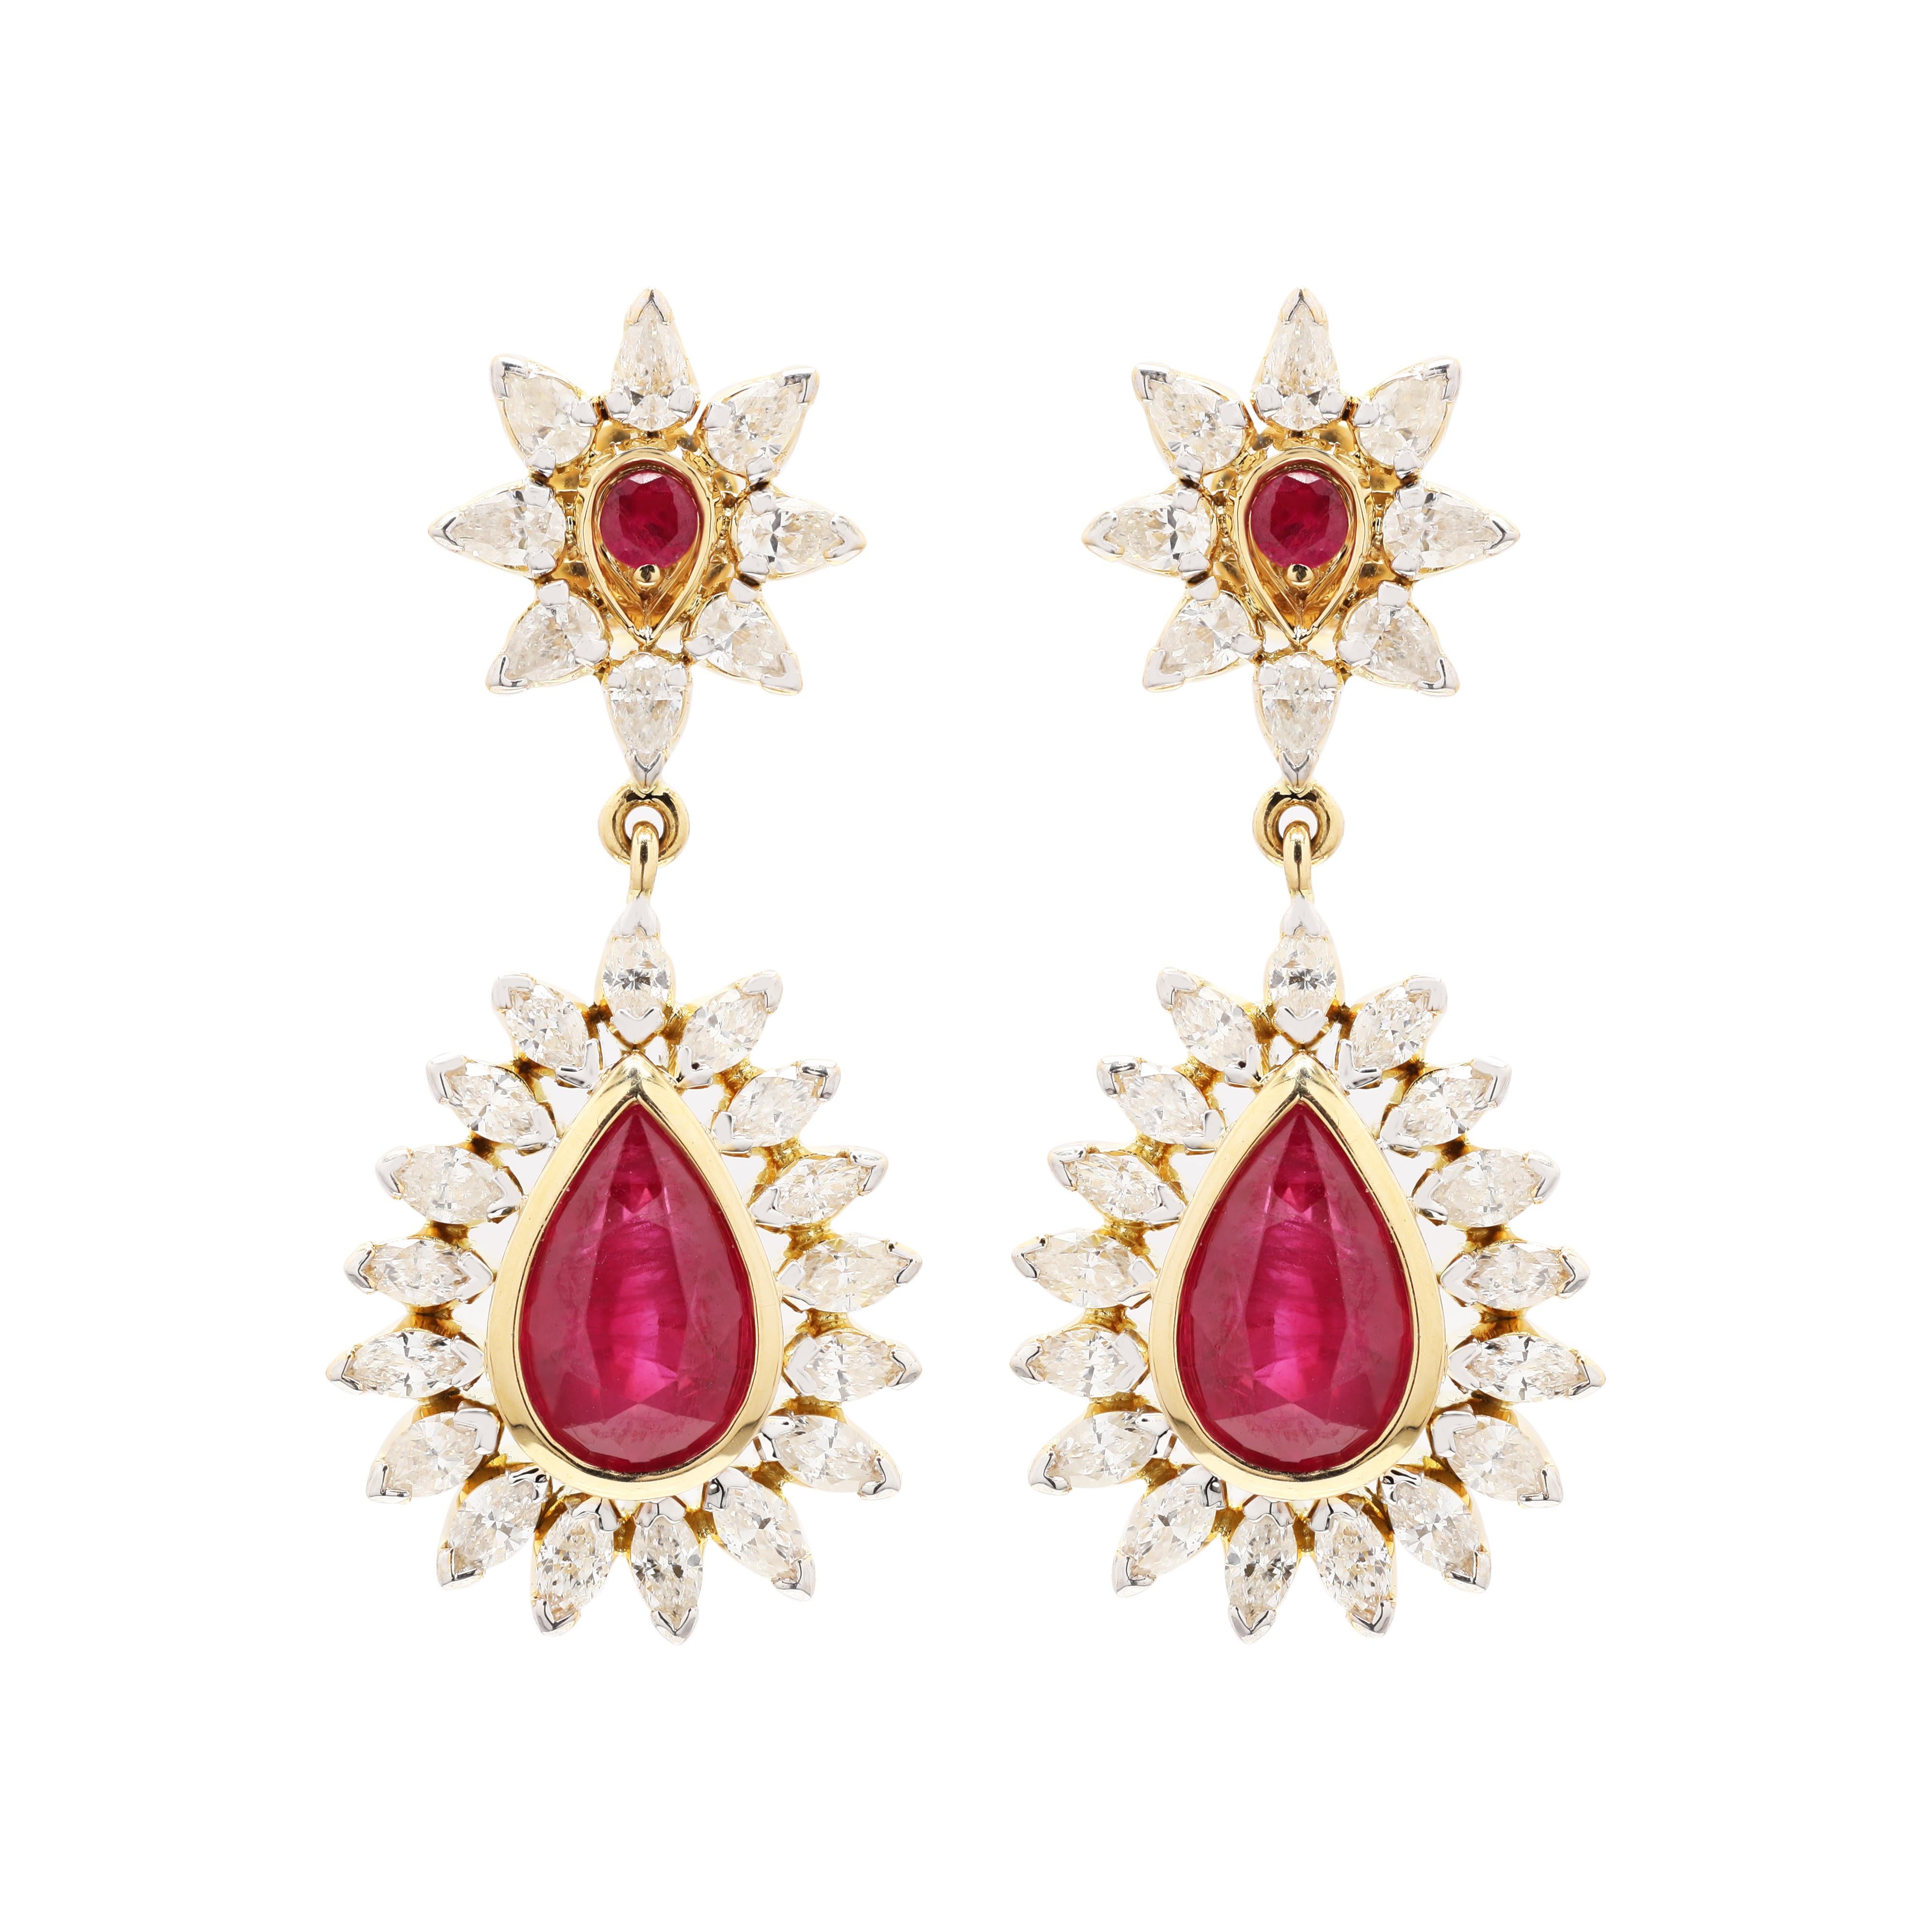 Diamond Ruby Wedding Dangle Earrings in 18K Gold with Diamonds to make a statement with your look. These earrings create a sparkling, luxurious look featuring oval cut gemstone.
If you love to gravitate towards unique styles, this piece of jewelry